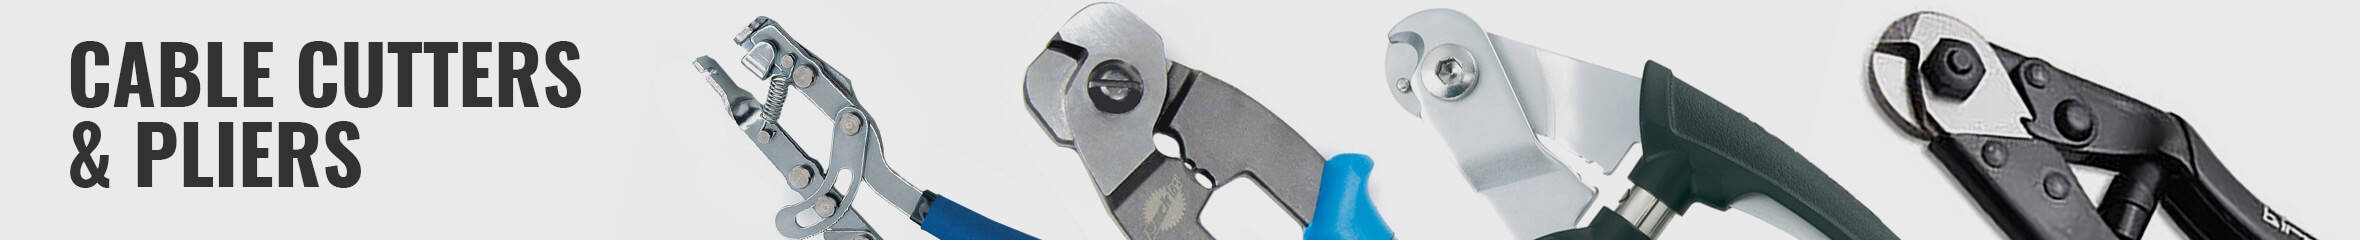 Cable Cutters & Pliers